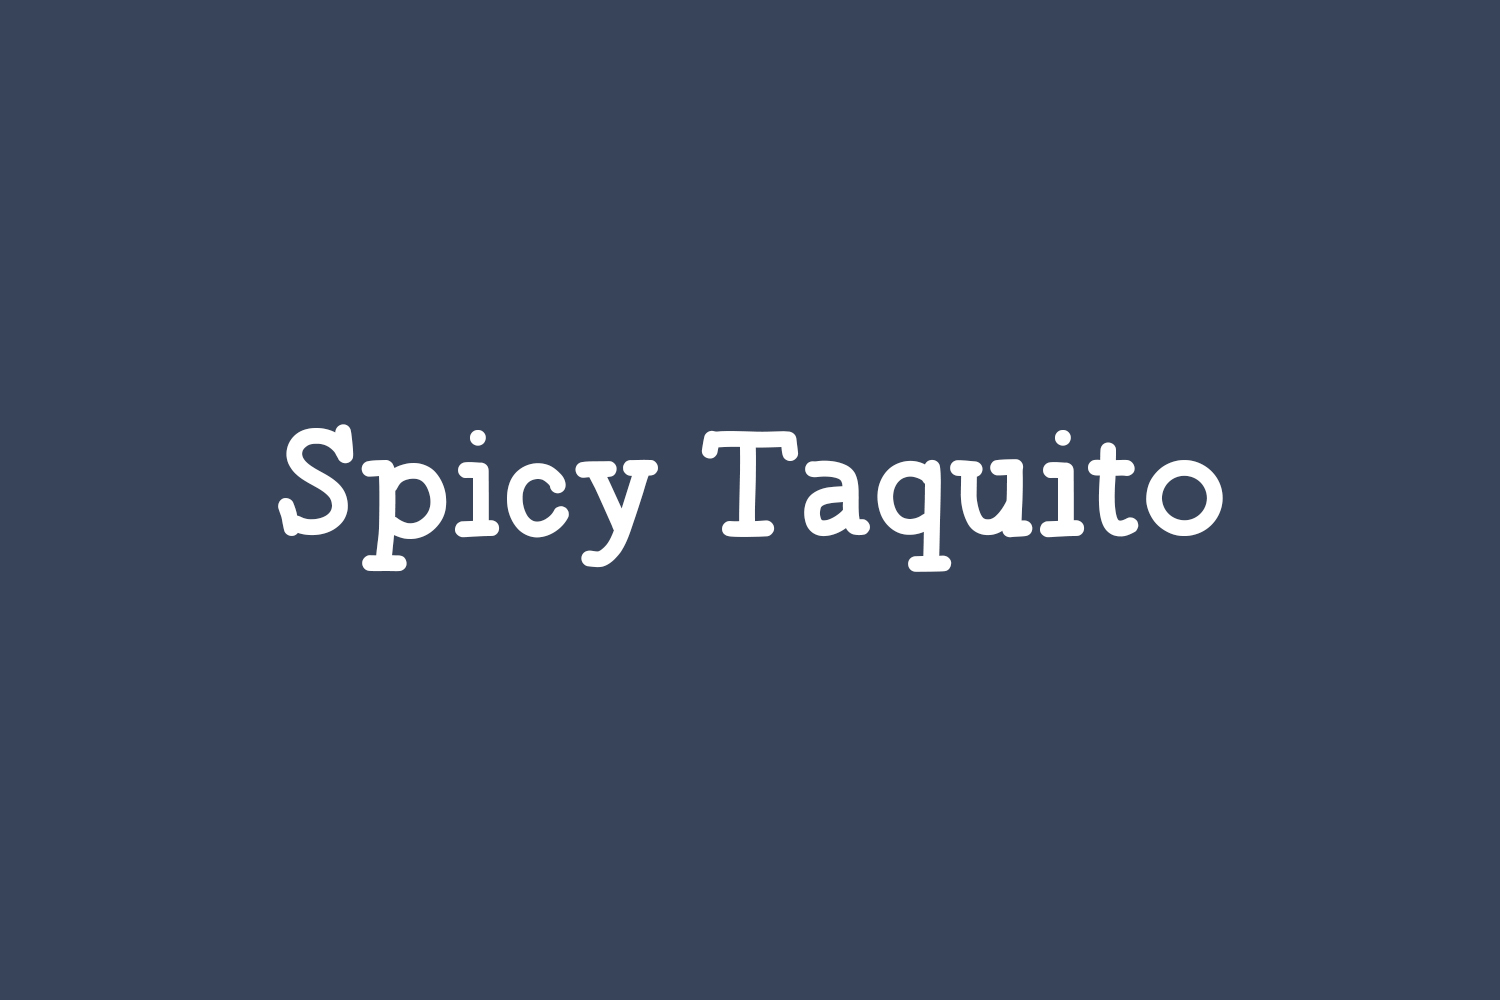 Spicy Taquito Free Font